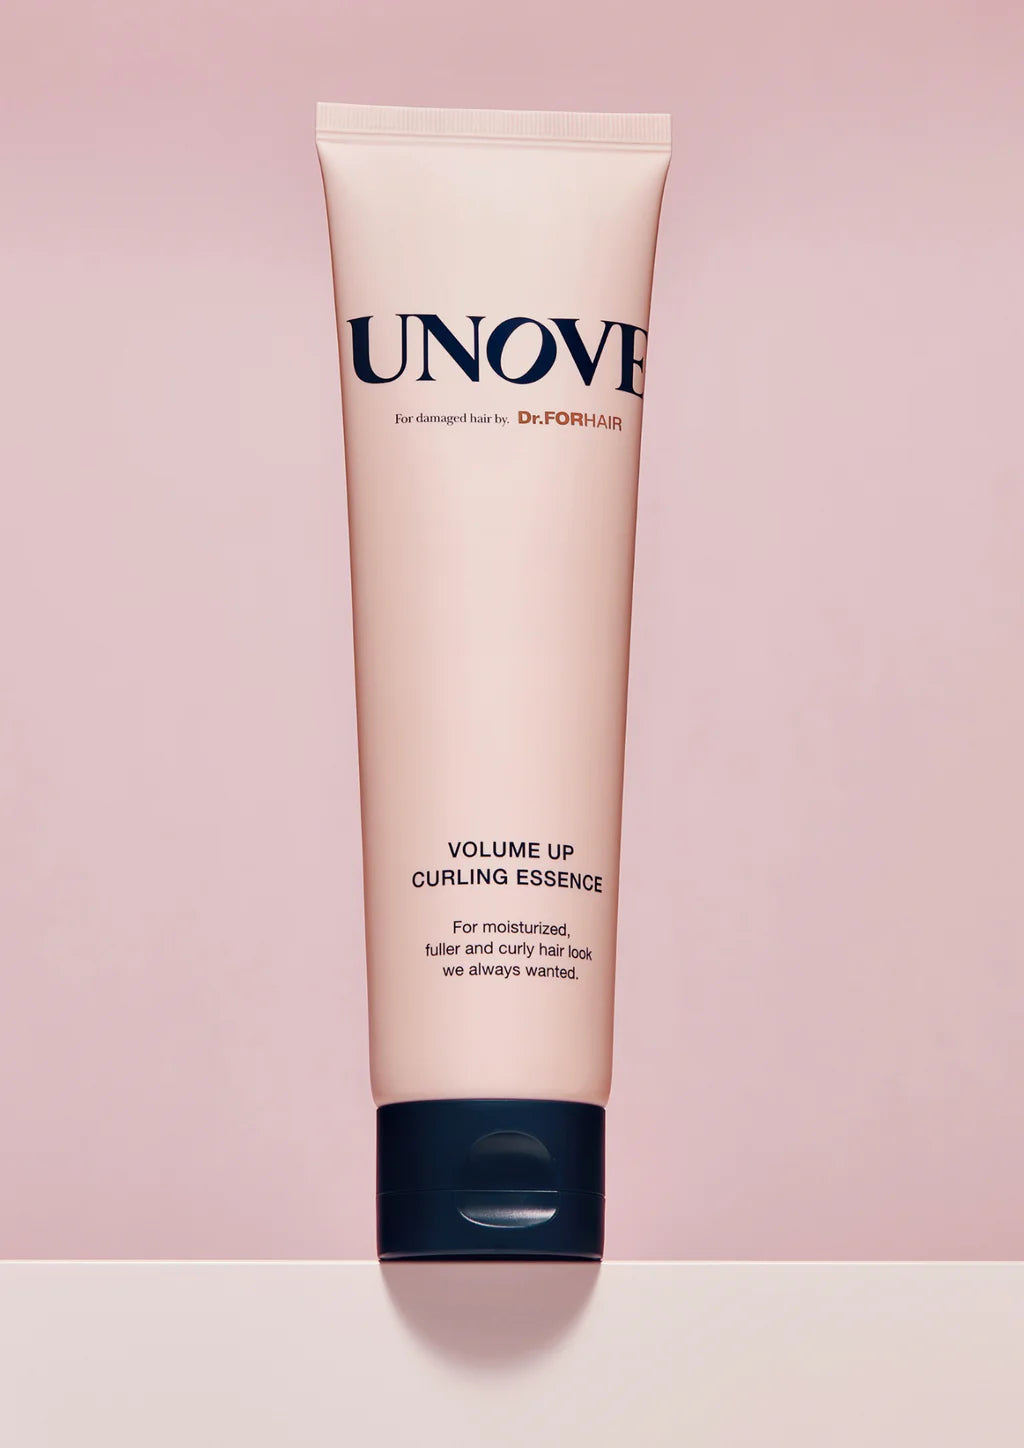 UNOVE Volume Up Curling Essence - THE KDROPS UNOVE